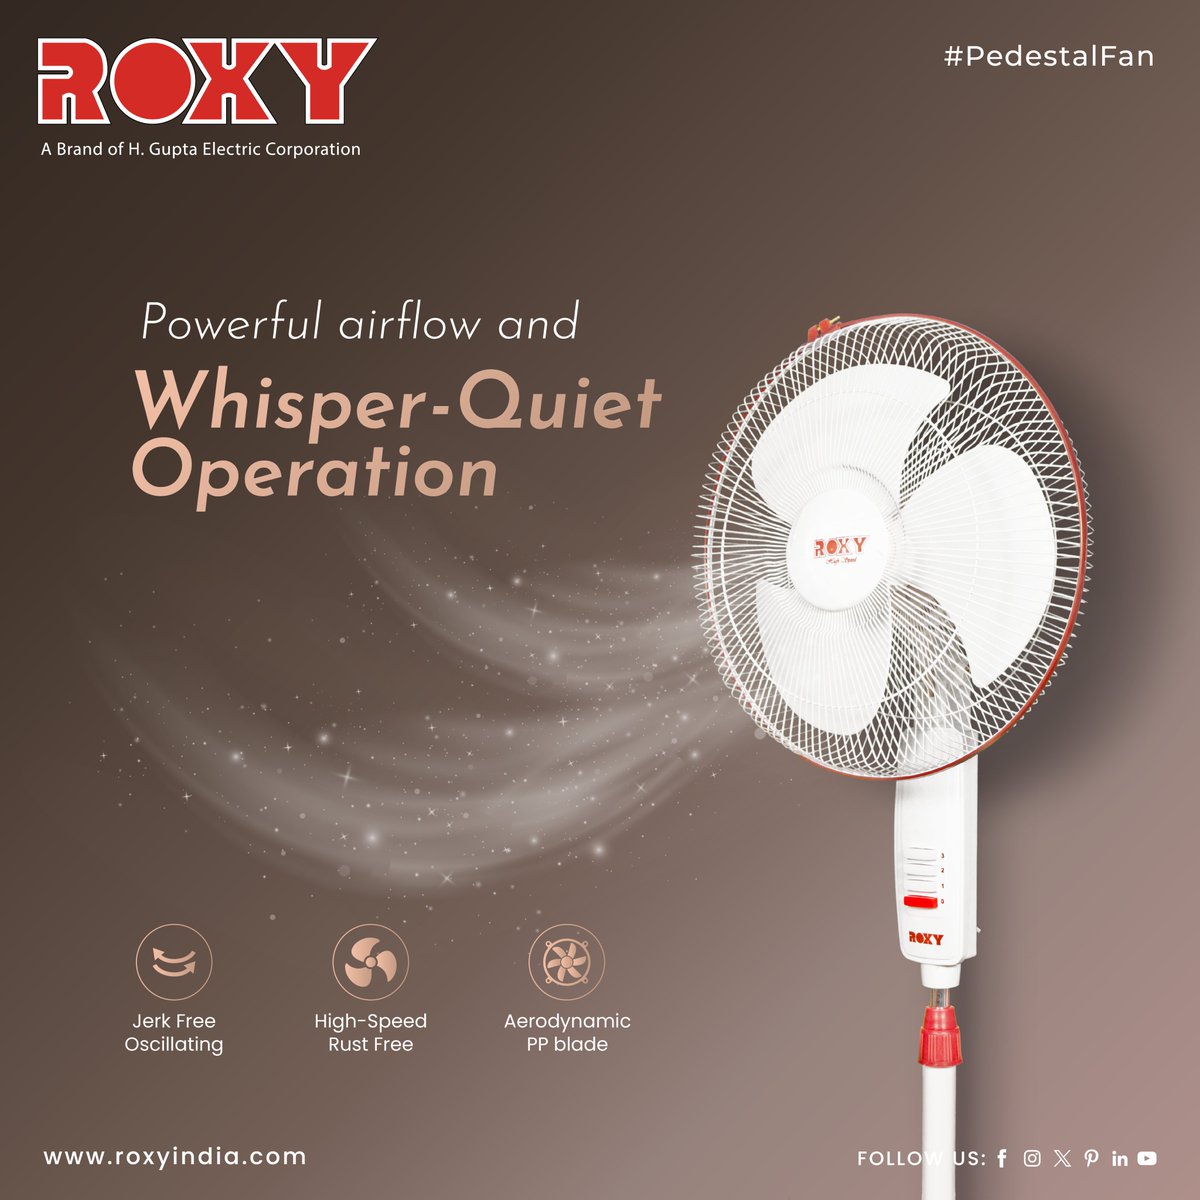 Cool down in peace with the Pedestal fan from Roxy Home Appliances. Its powerful airflow and whisper-quiet operation make it the perfect companion for any room.